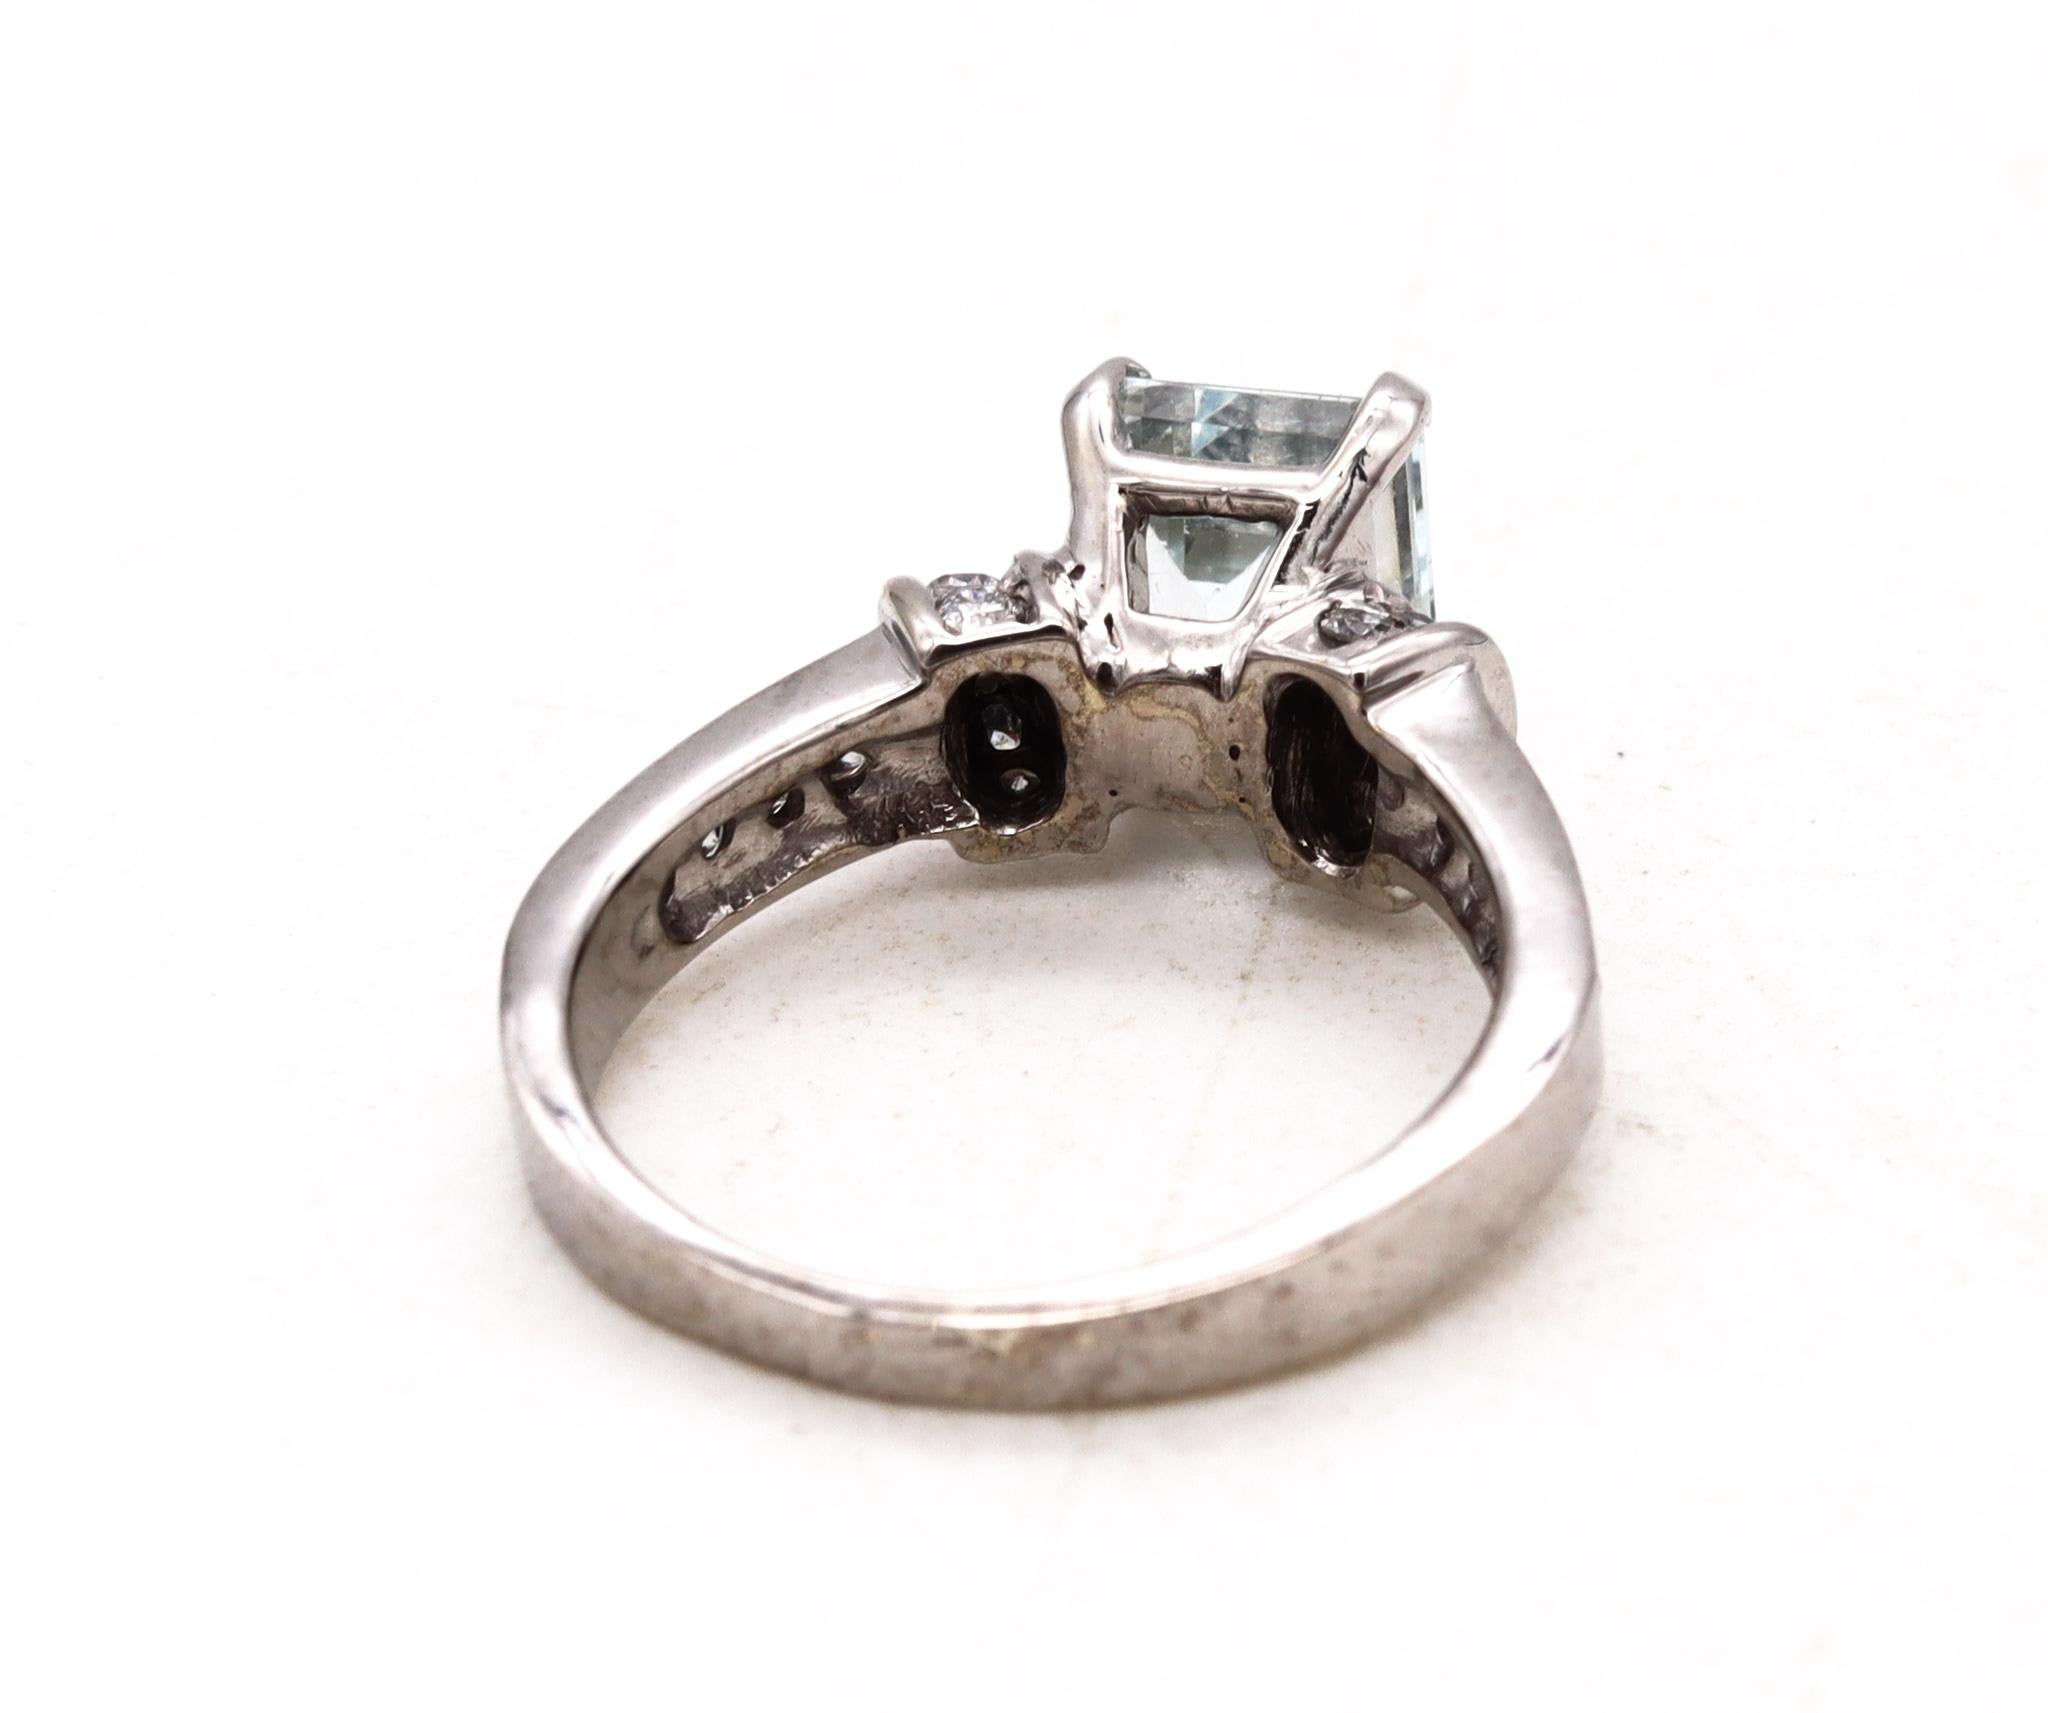 Women's Classic Cocktail Ring In 14Kt White Gold With 3.61 Ctw In Aquamarine And Diamond